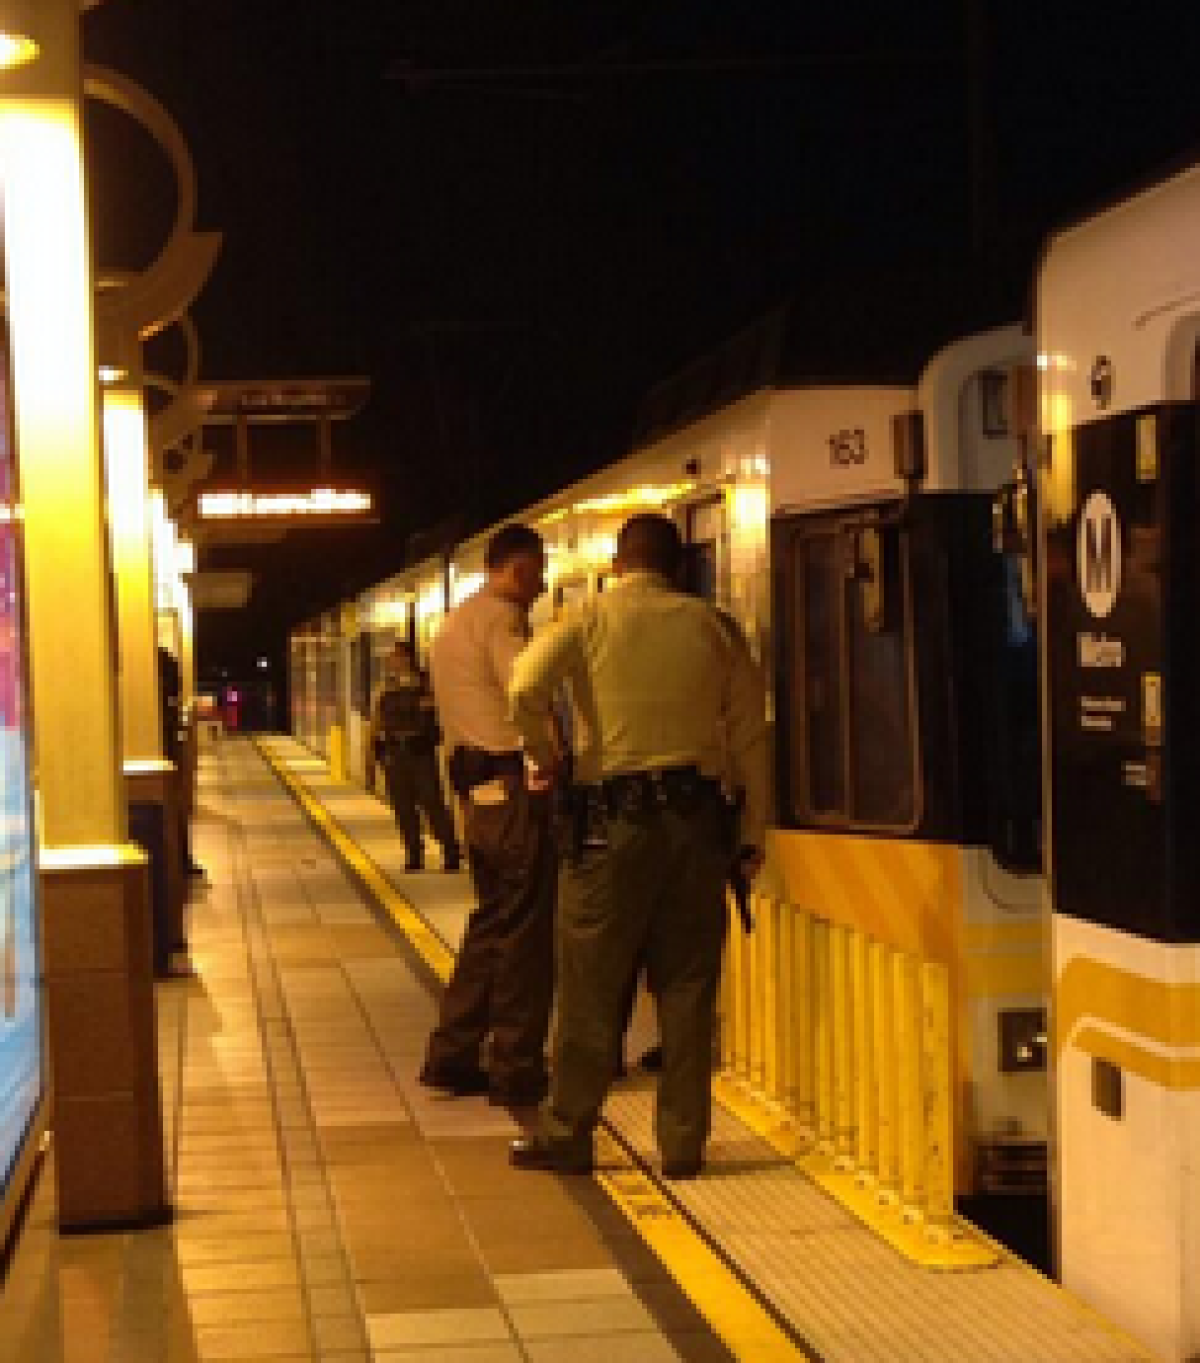 Deputies search the Metro Blue Line after someone reported three juveniles armed with guns Tuesday. No weapons were found.